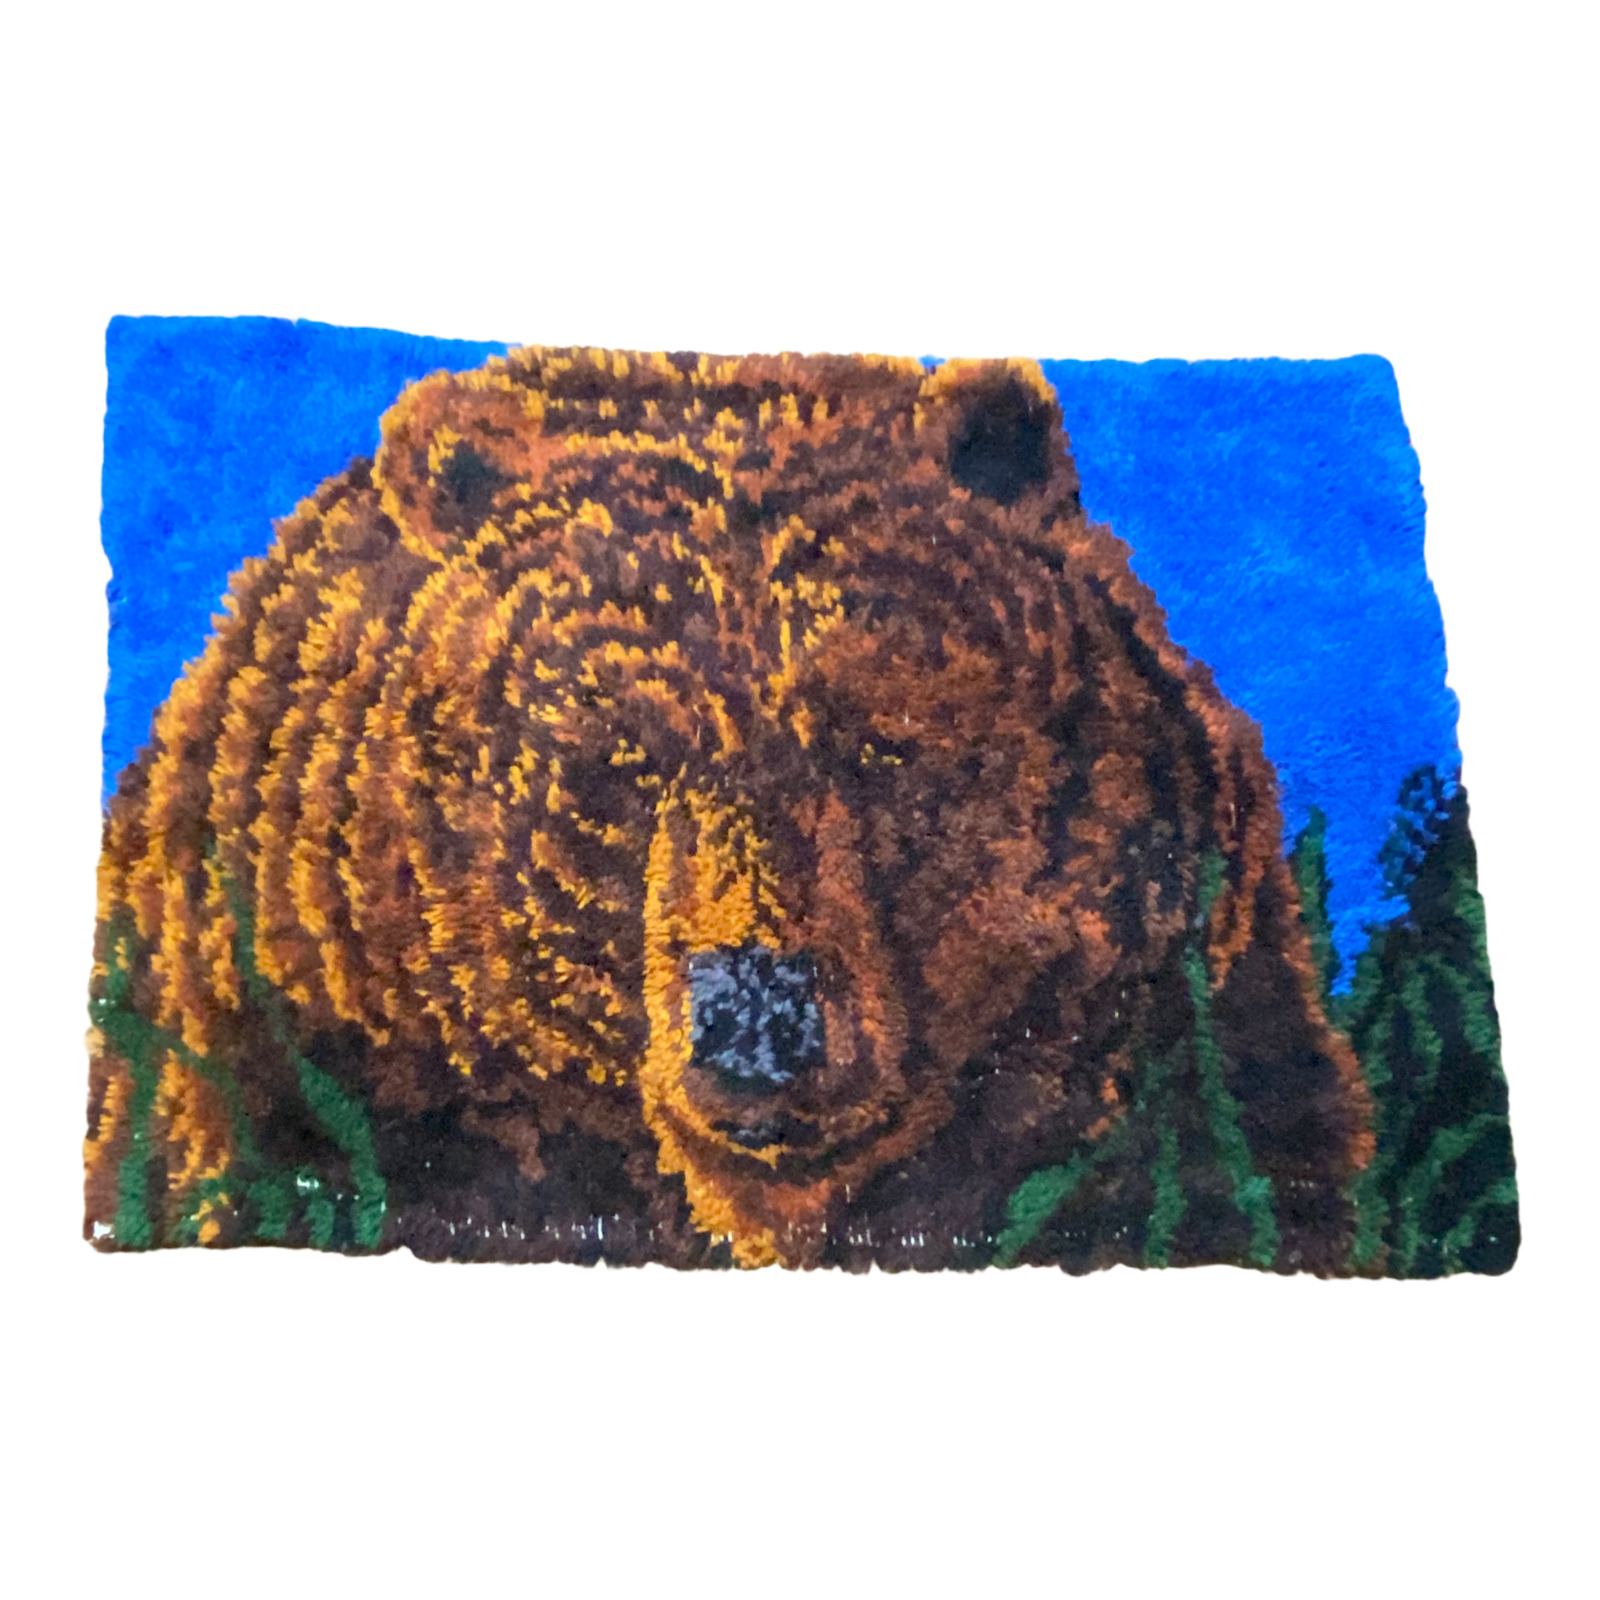 Large 60s 70s Vintage 48 x 33 Inches Latch Hook Rug Shag Carpet Brown Bear Rare